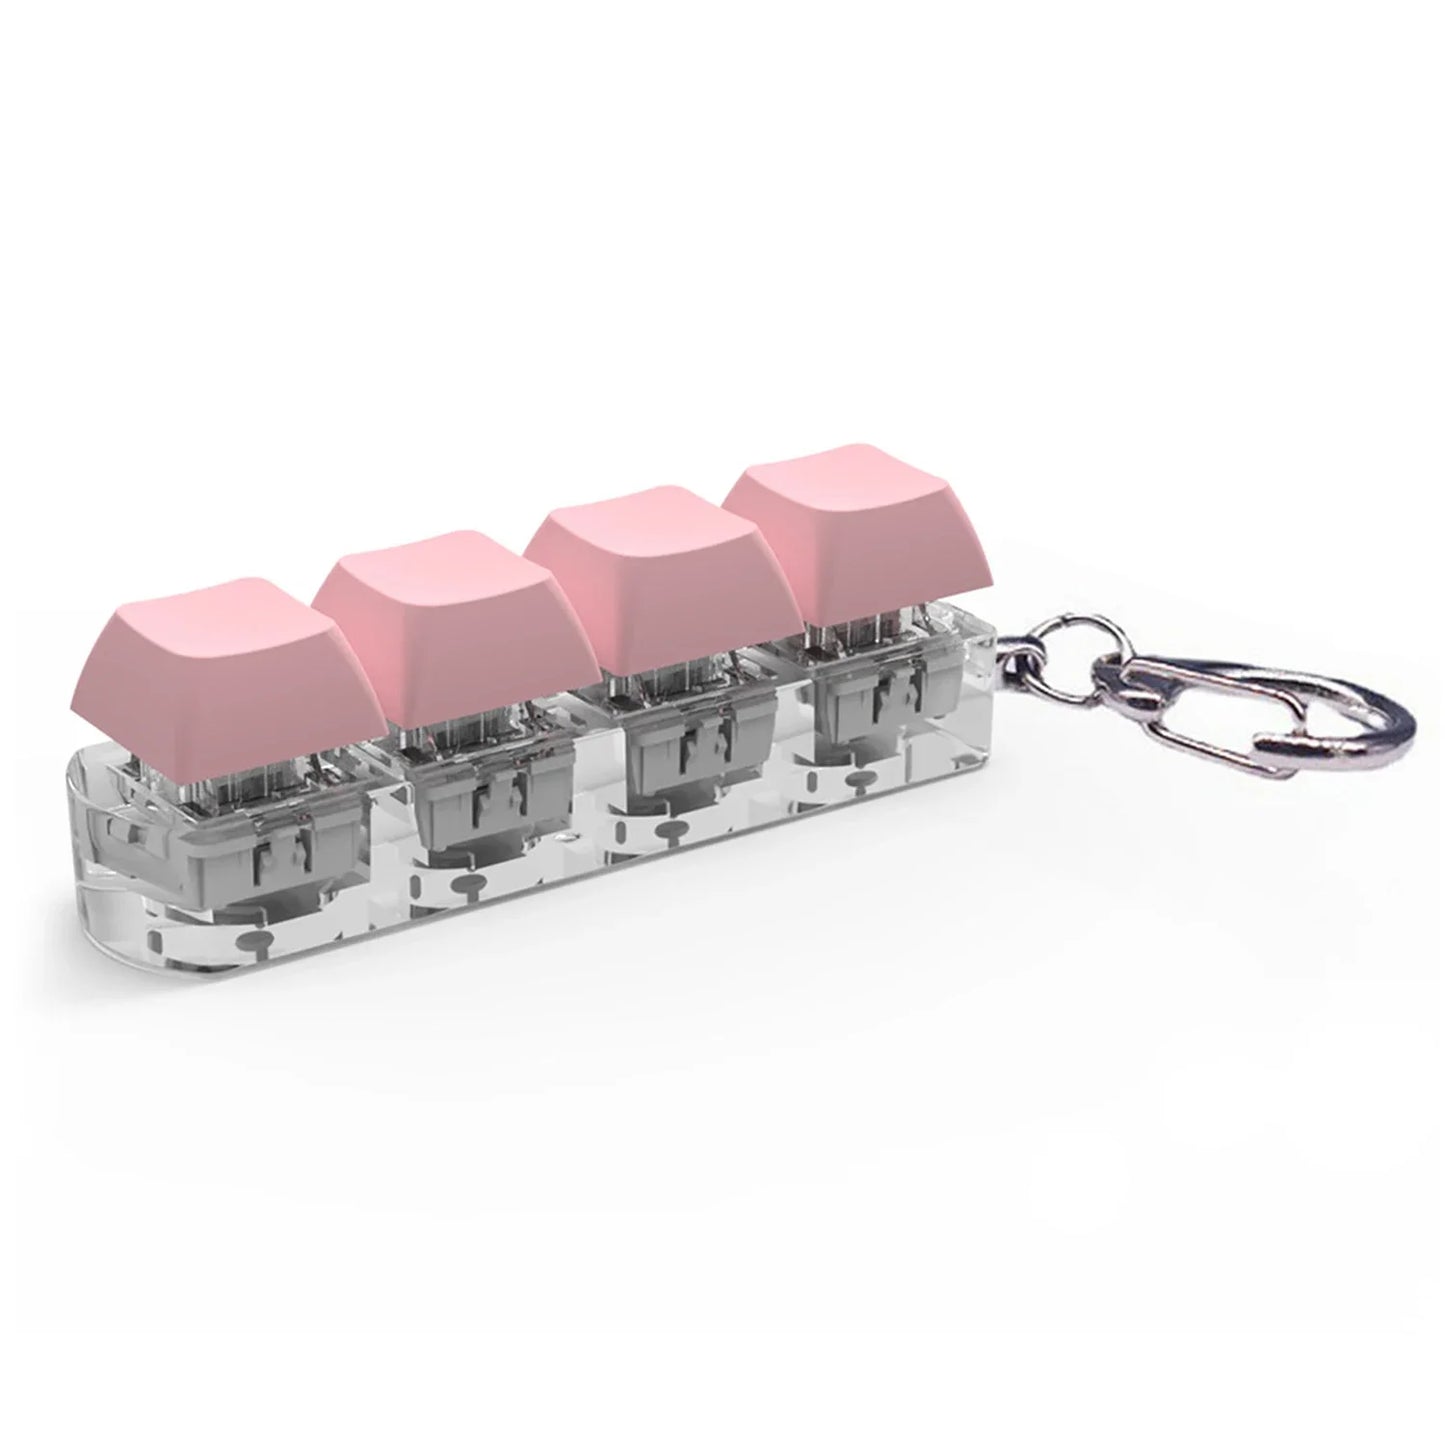 Keycap Toy Fidget with Sound Effects 4-Buttons Light Portable Stress Relief Mechanical Keyboard Clicking Sensory Keychain Pink